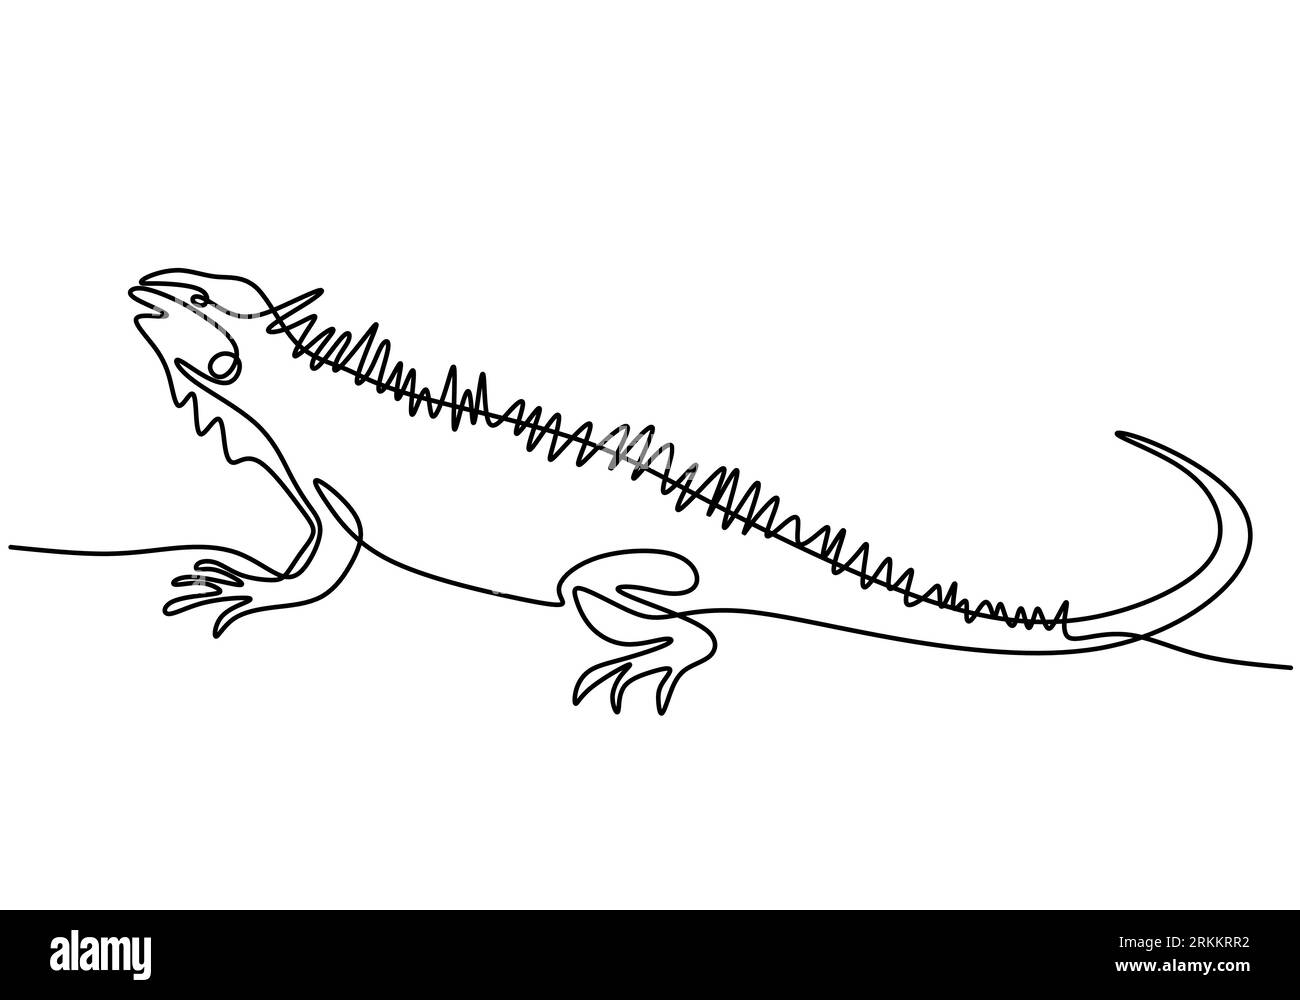 One continuous line drawing of iguana lizard. Exotic reptile animal for company logo identity or pet lover society. Vector hand drawn illustration min Stock Vector